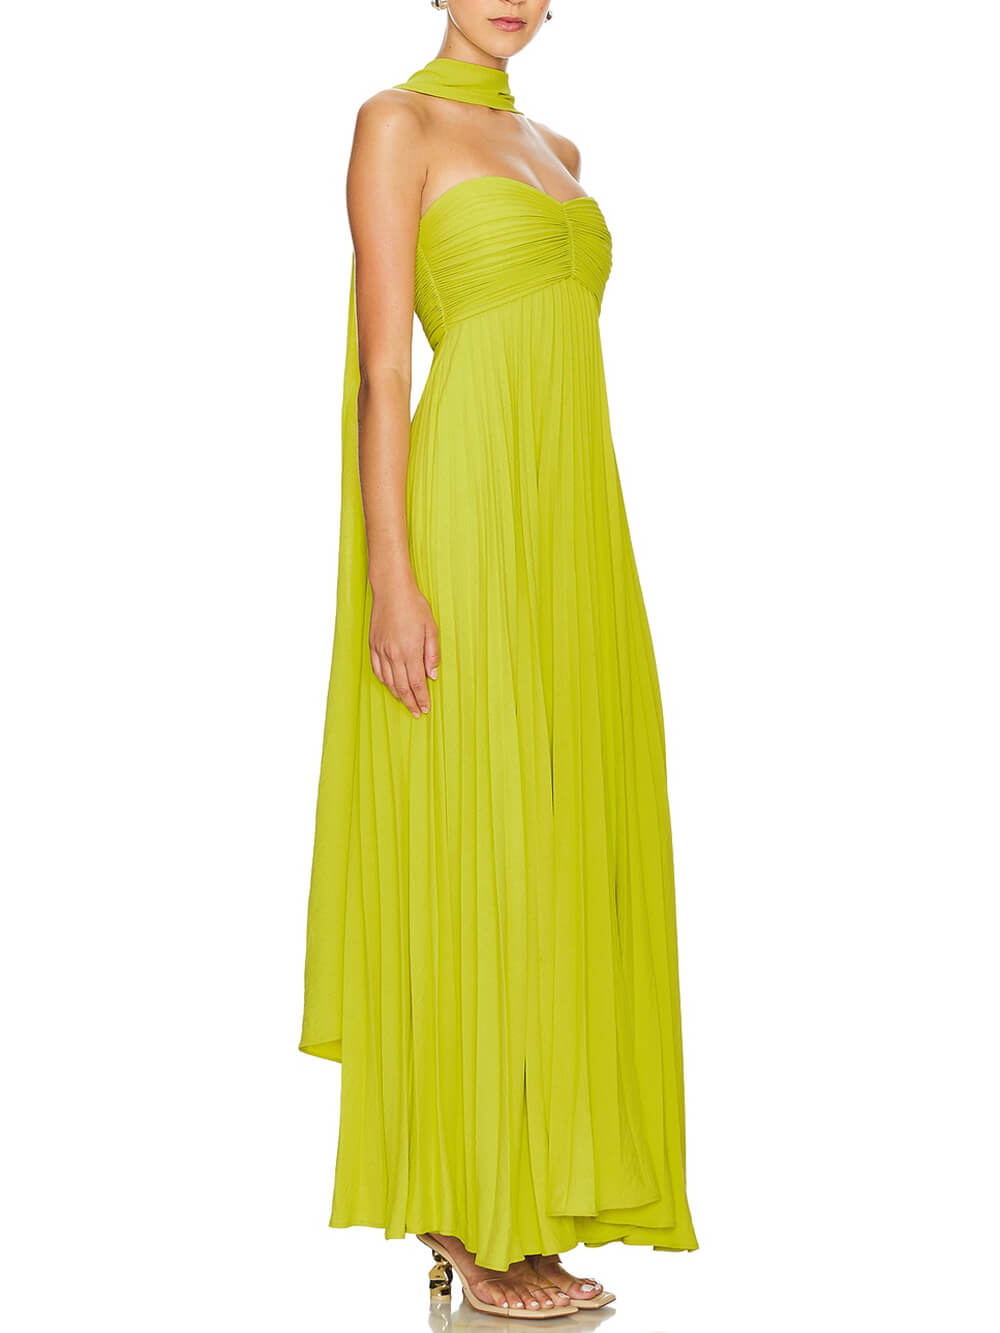 Exquisite Elegant Pleated Off-the-shoulder Party Maxi Dress